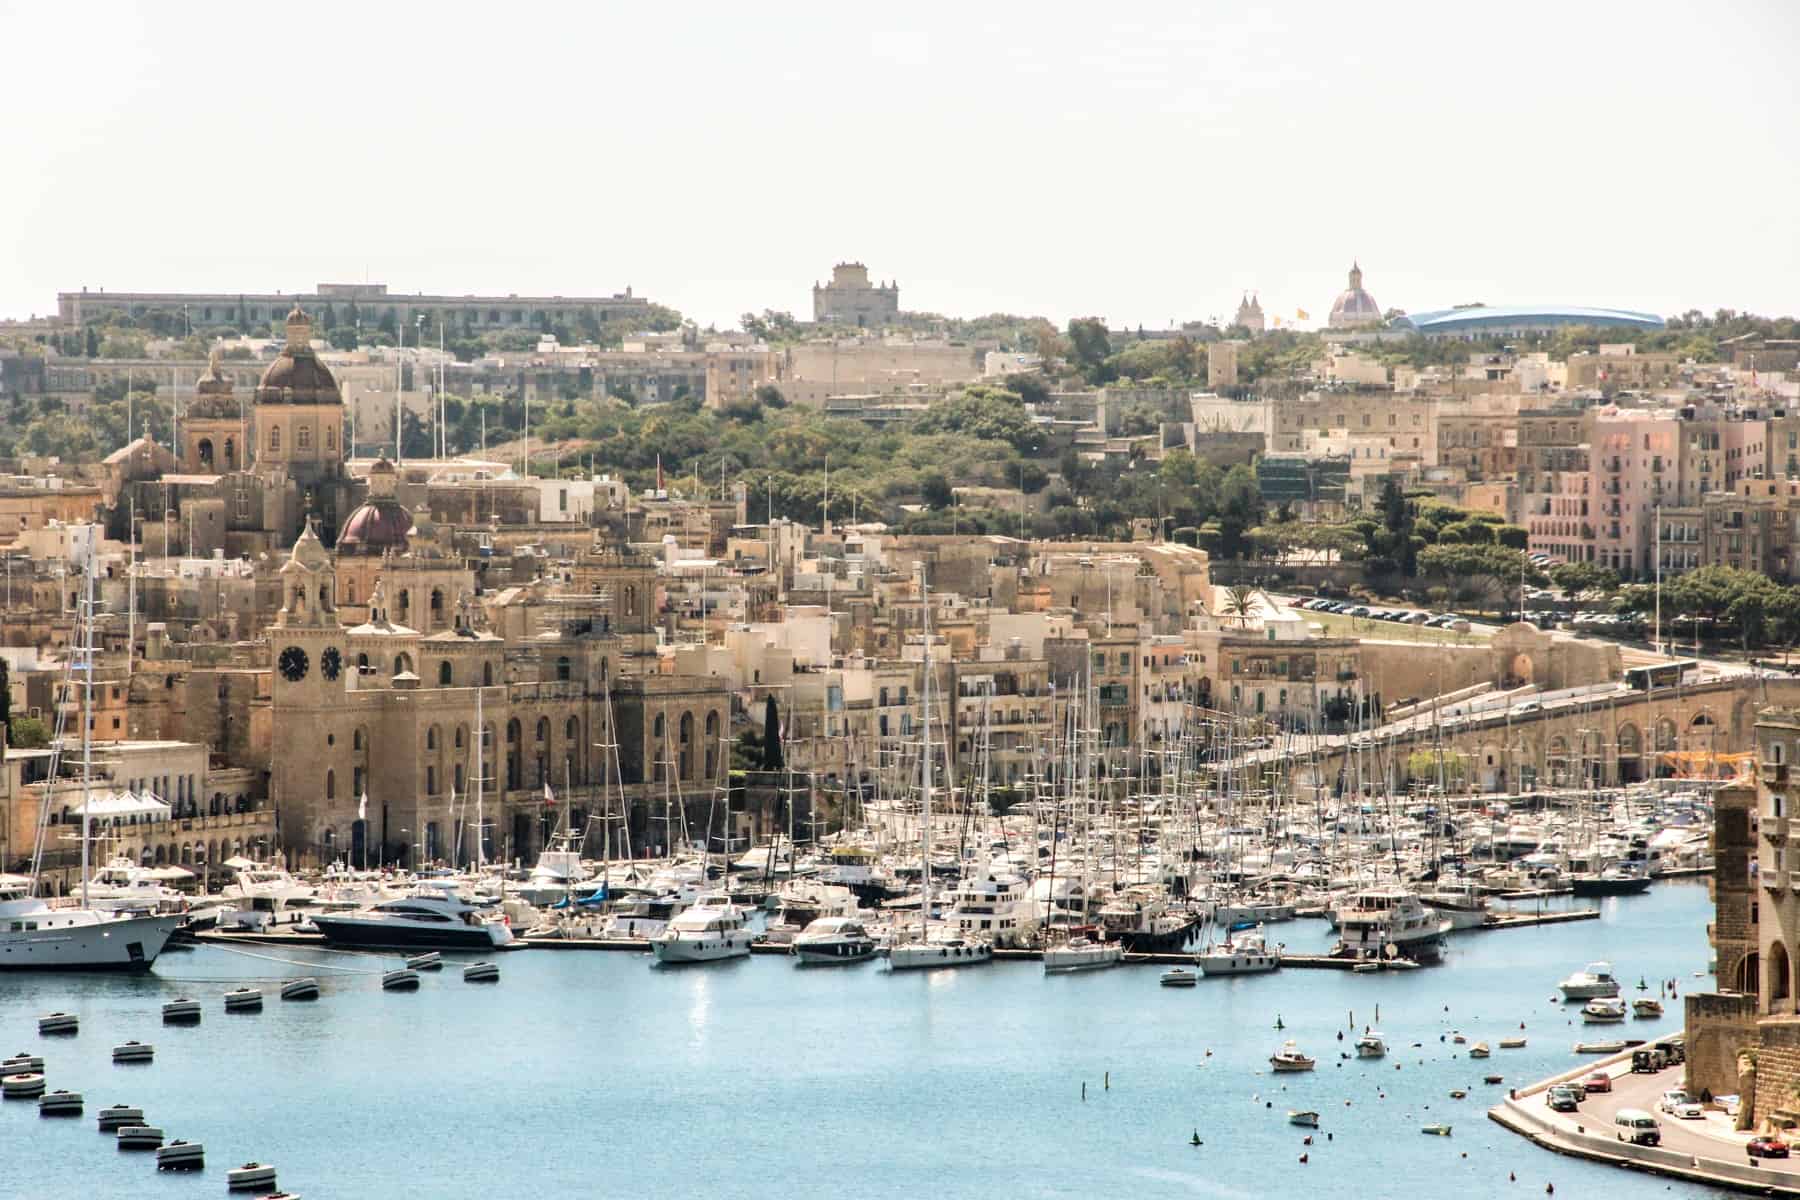 A sky blue water sea port in Malta full of ships and backed by old, golden stone buildings reaching all the way to the hilltop.